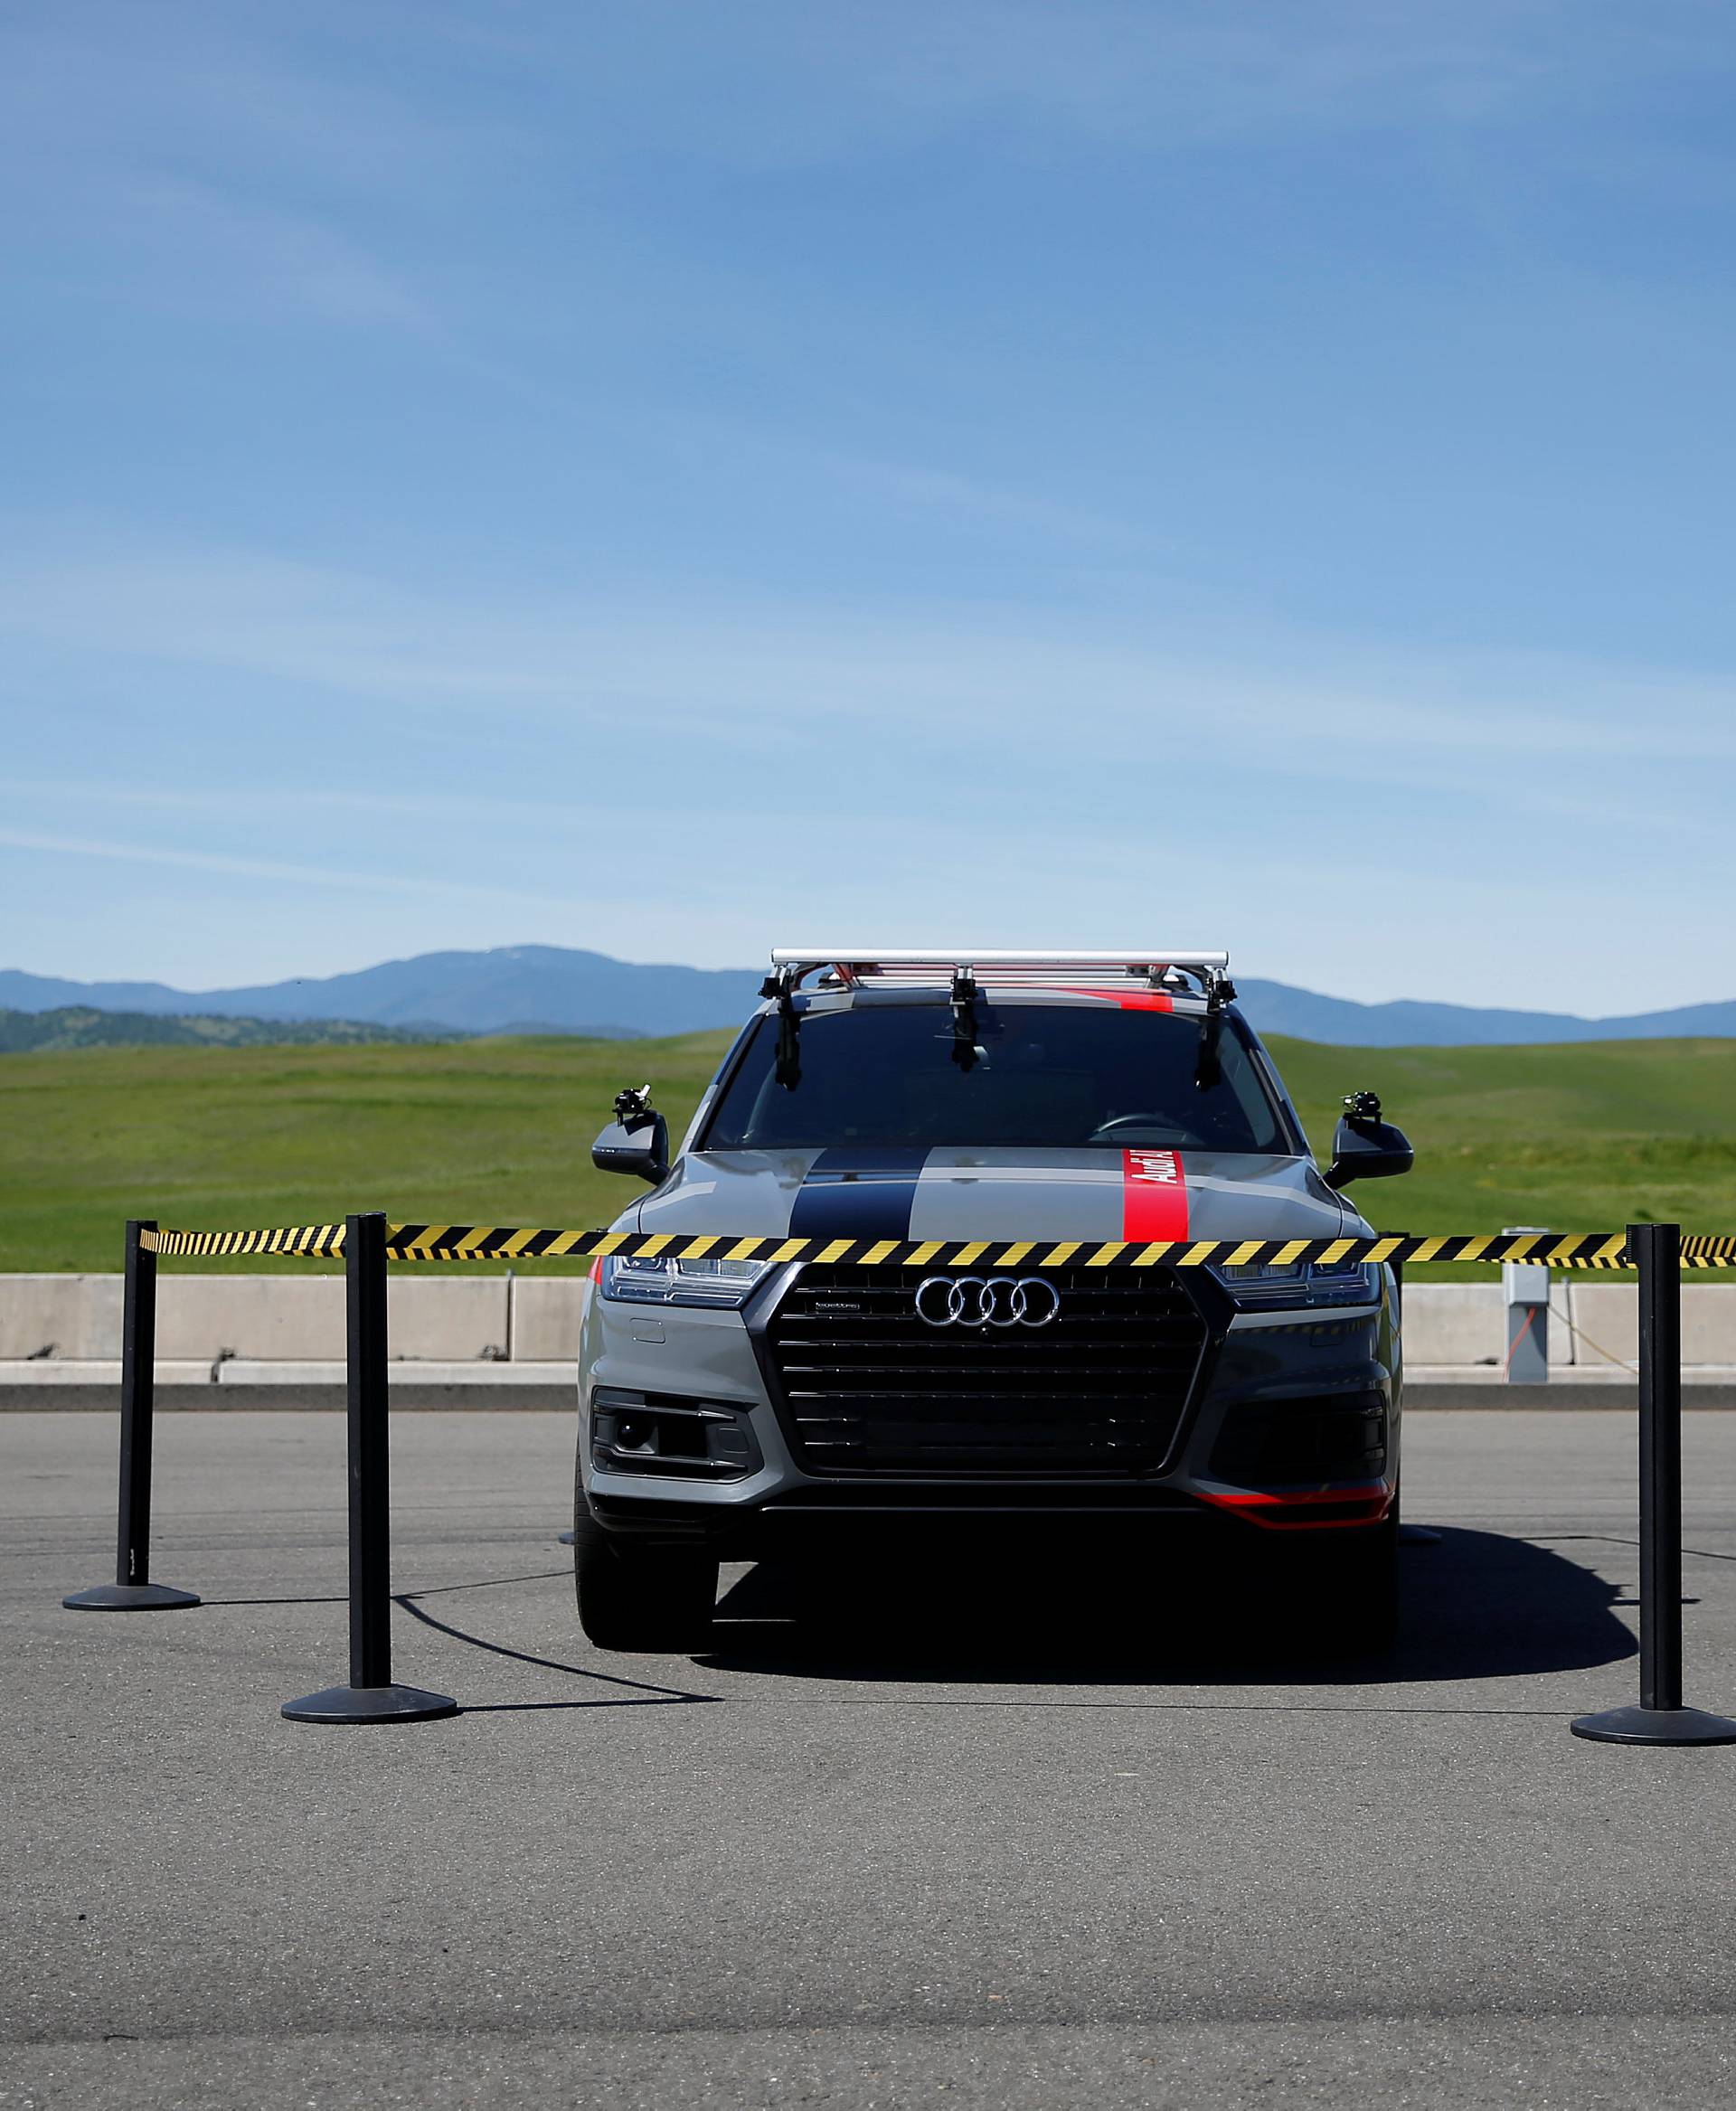 An Audi self-driving vehicle is seen during a self-racing cars event at Thunderhill Raceway in Willows, California